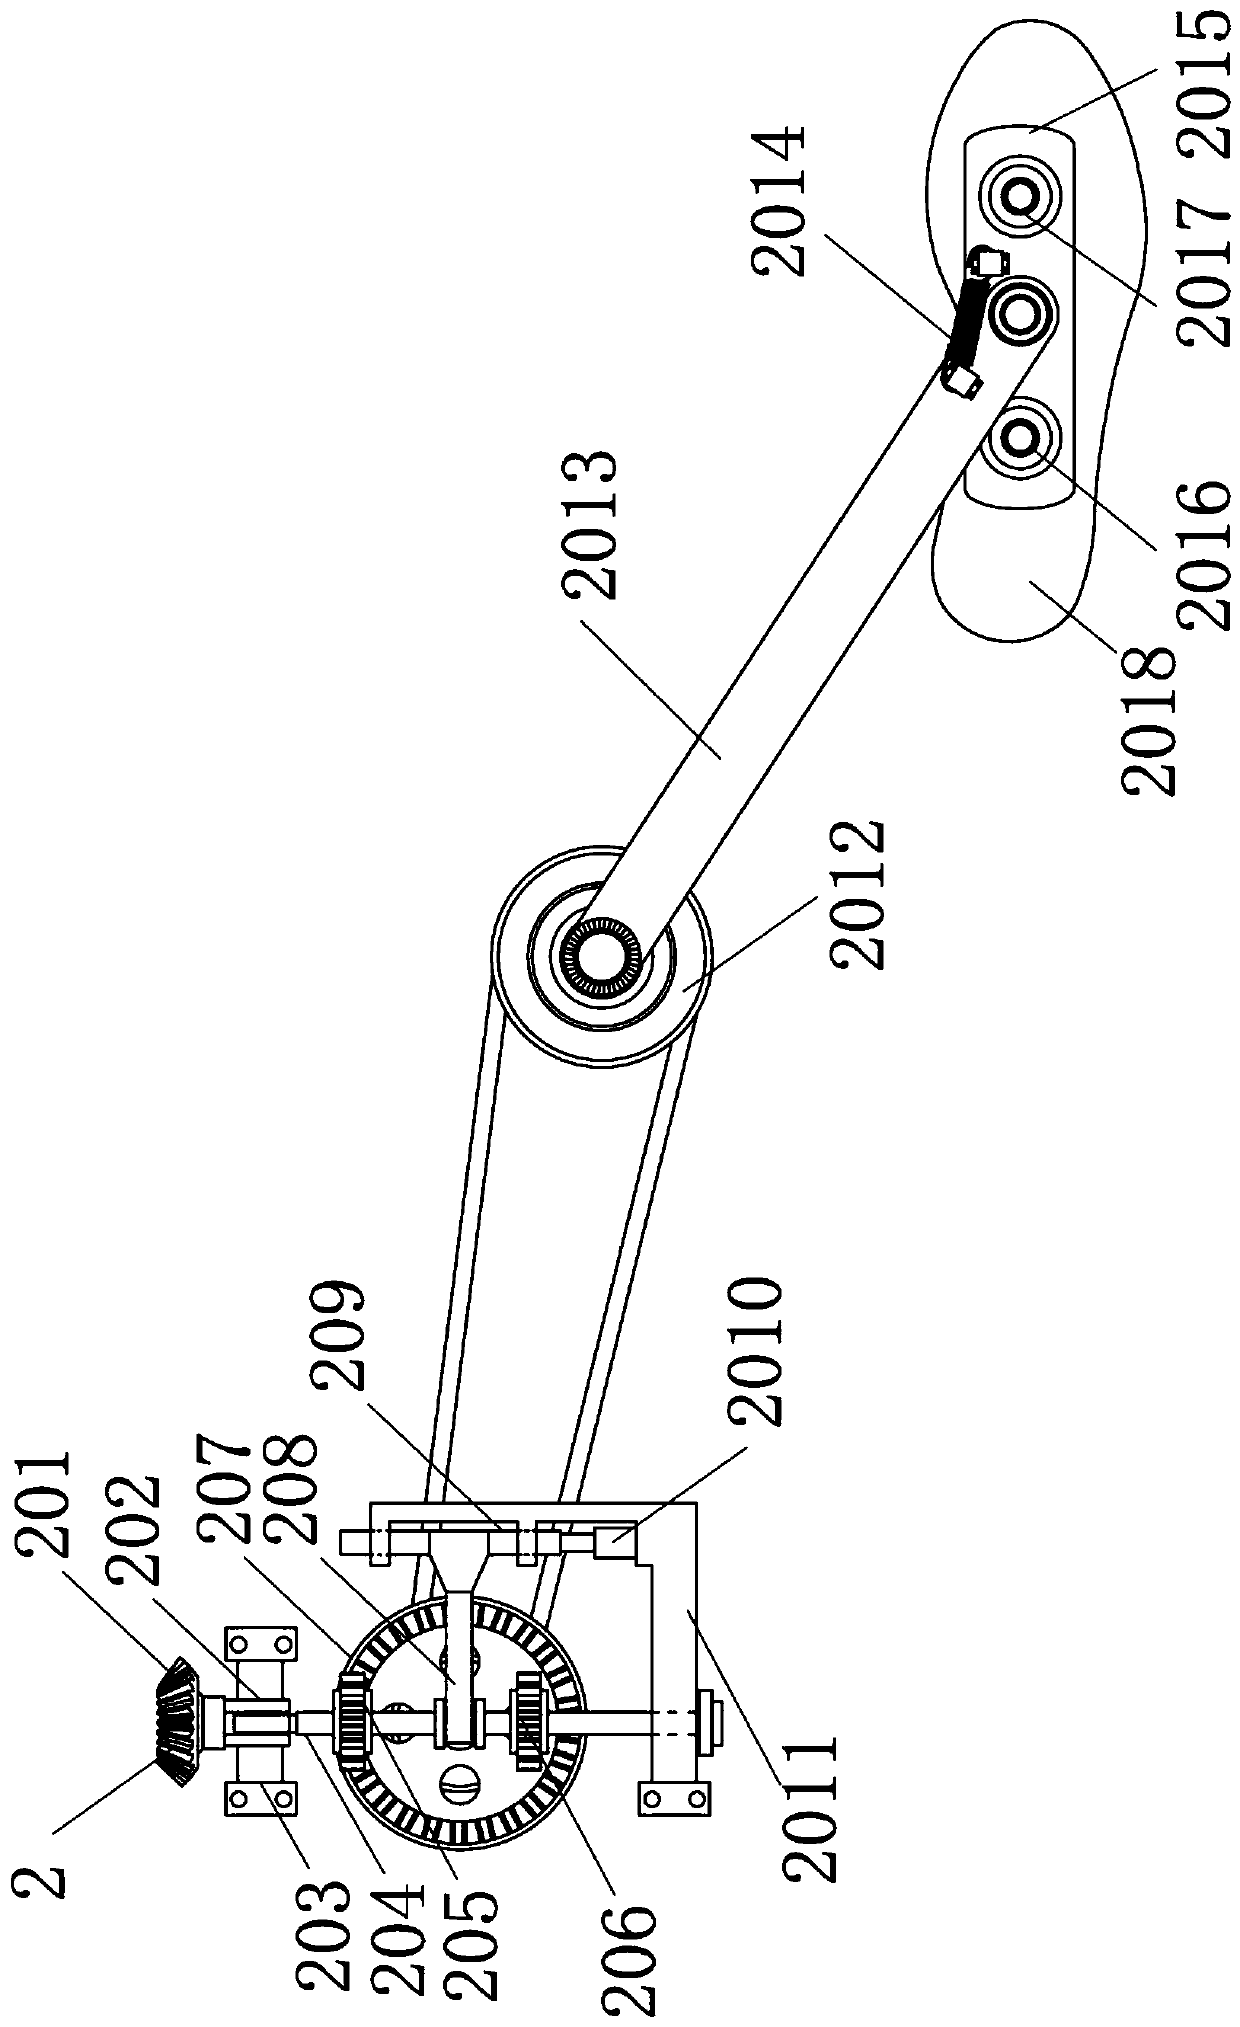 Rubber forming and trimming device